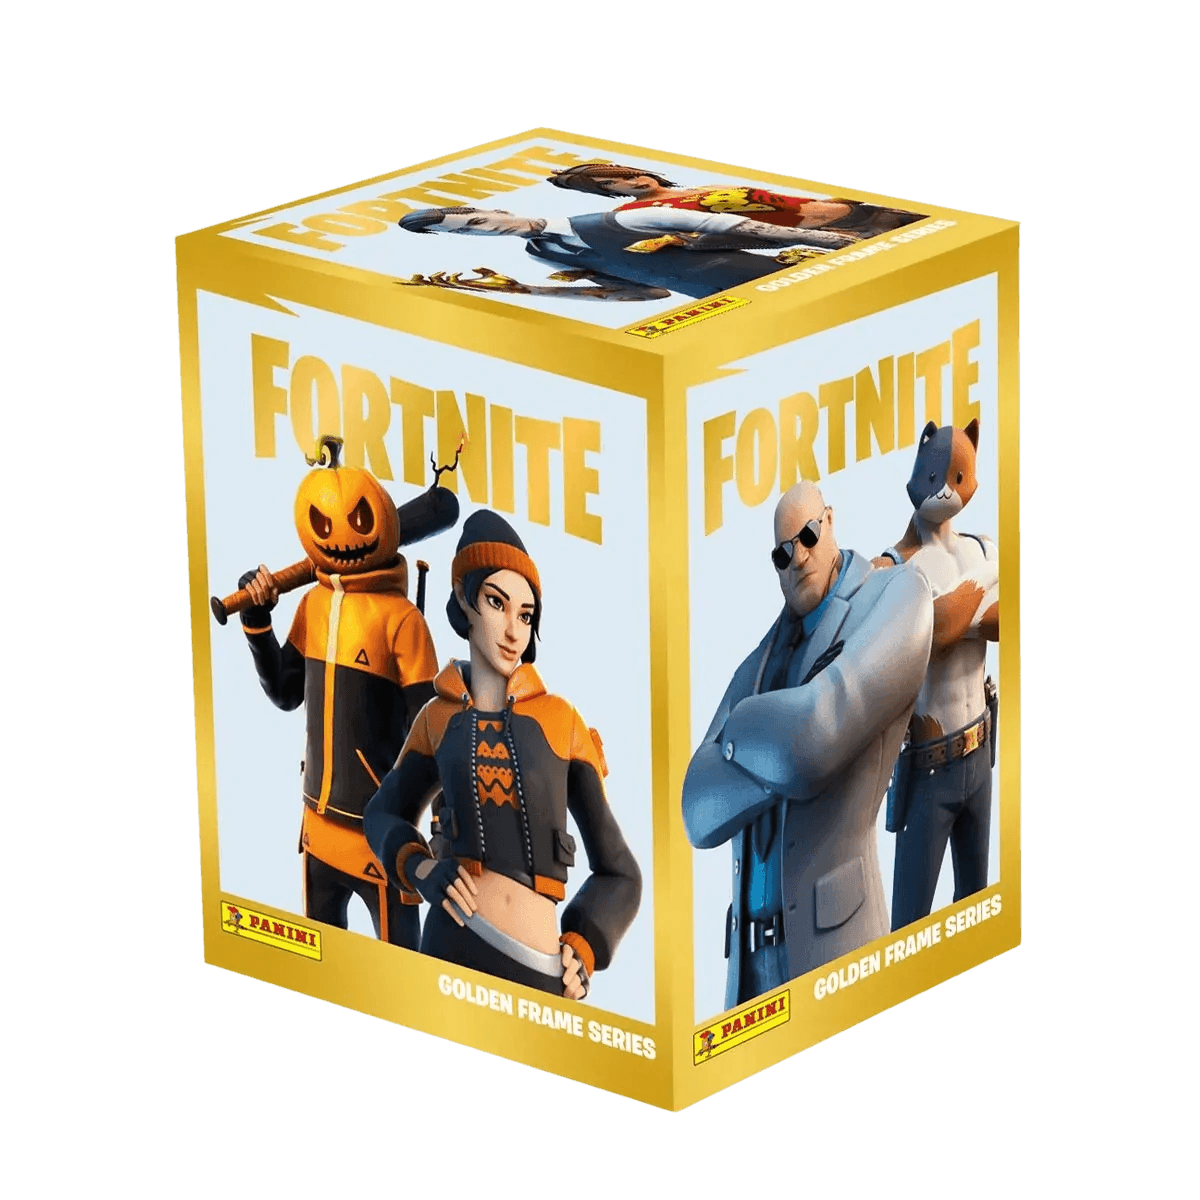 Fortnite Gold Frame Series Sticker Collection - Booster Box (36 Packets) - The Card Vault